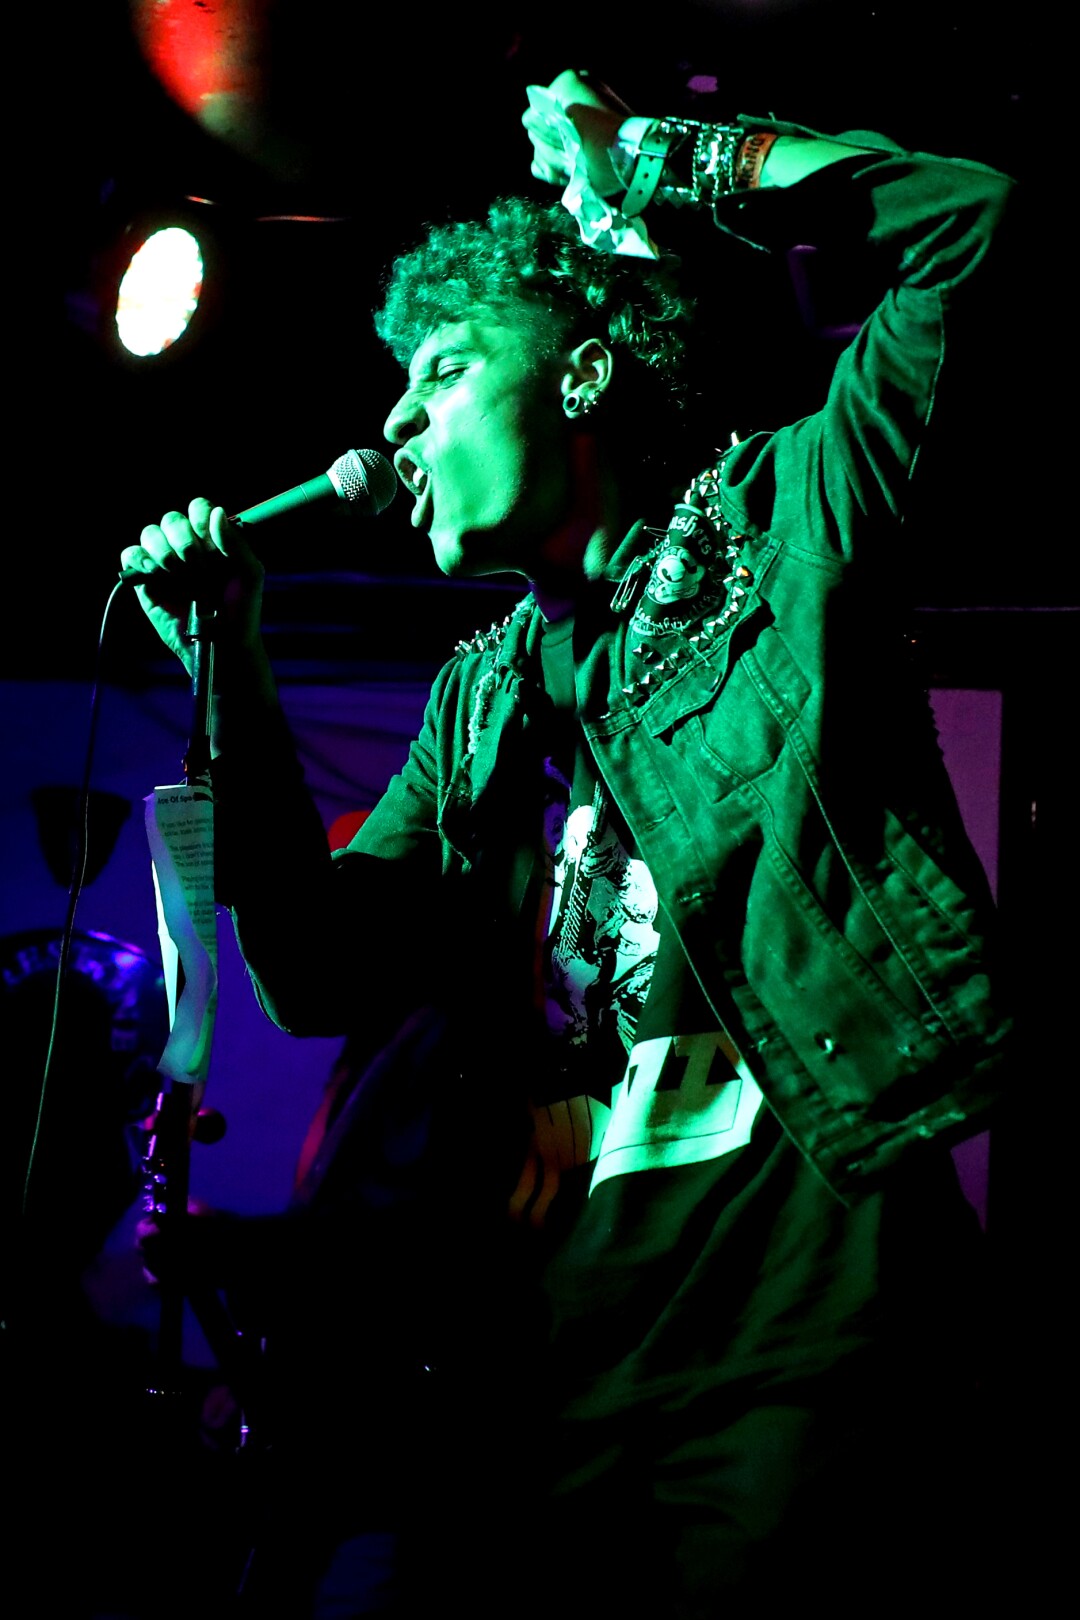 A man sings in a green light on a stage